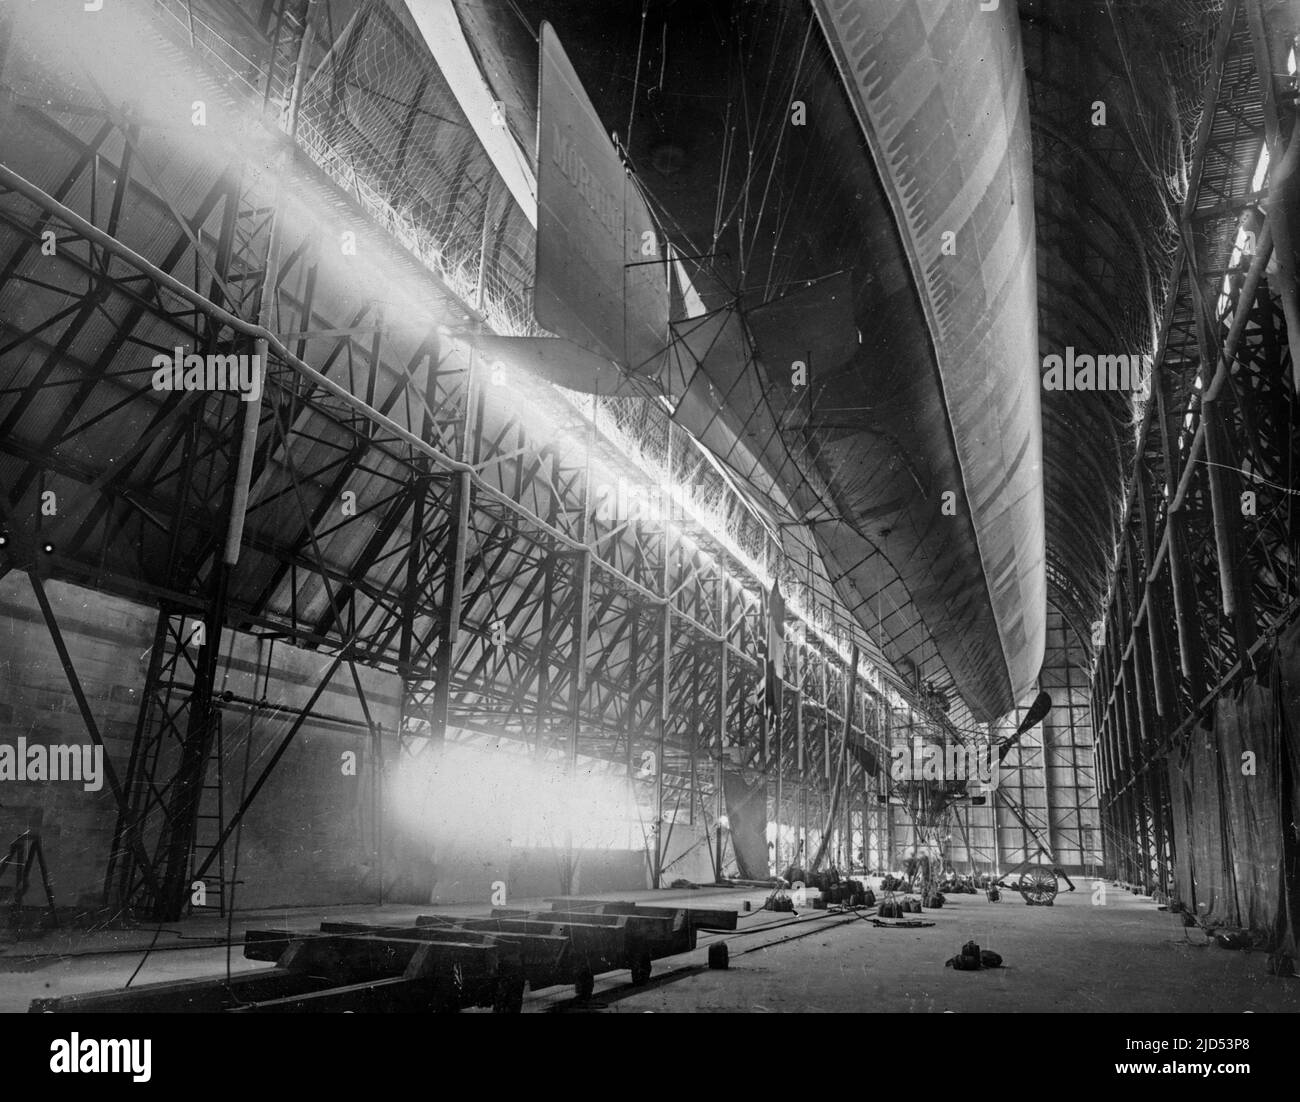 The Airship Lebaudy Morning Post in its hangar.  It was a French Semi-Rigid Airship built for The British Army in 1910. At the time it was the largest airship in the world. It was destroyed on 4th May 1911. Stock Photo